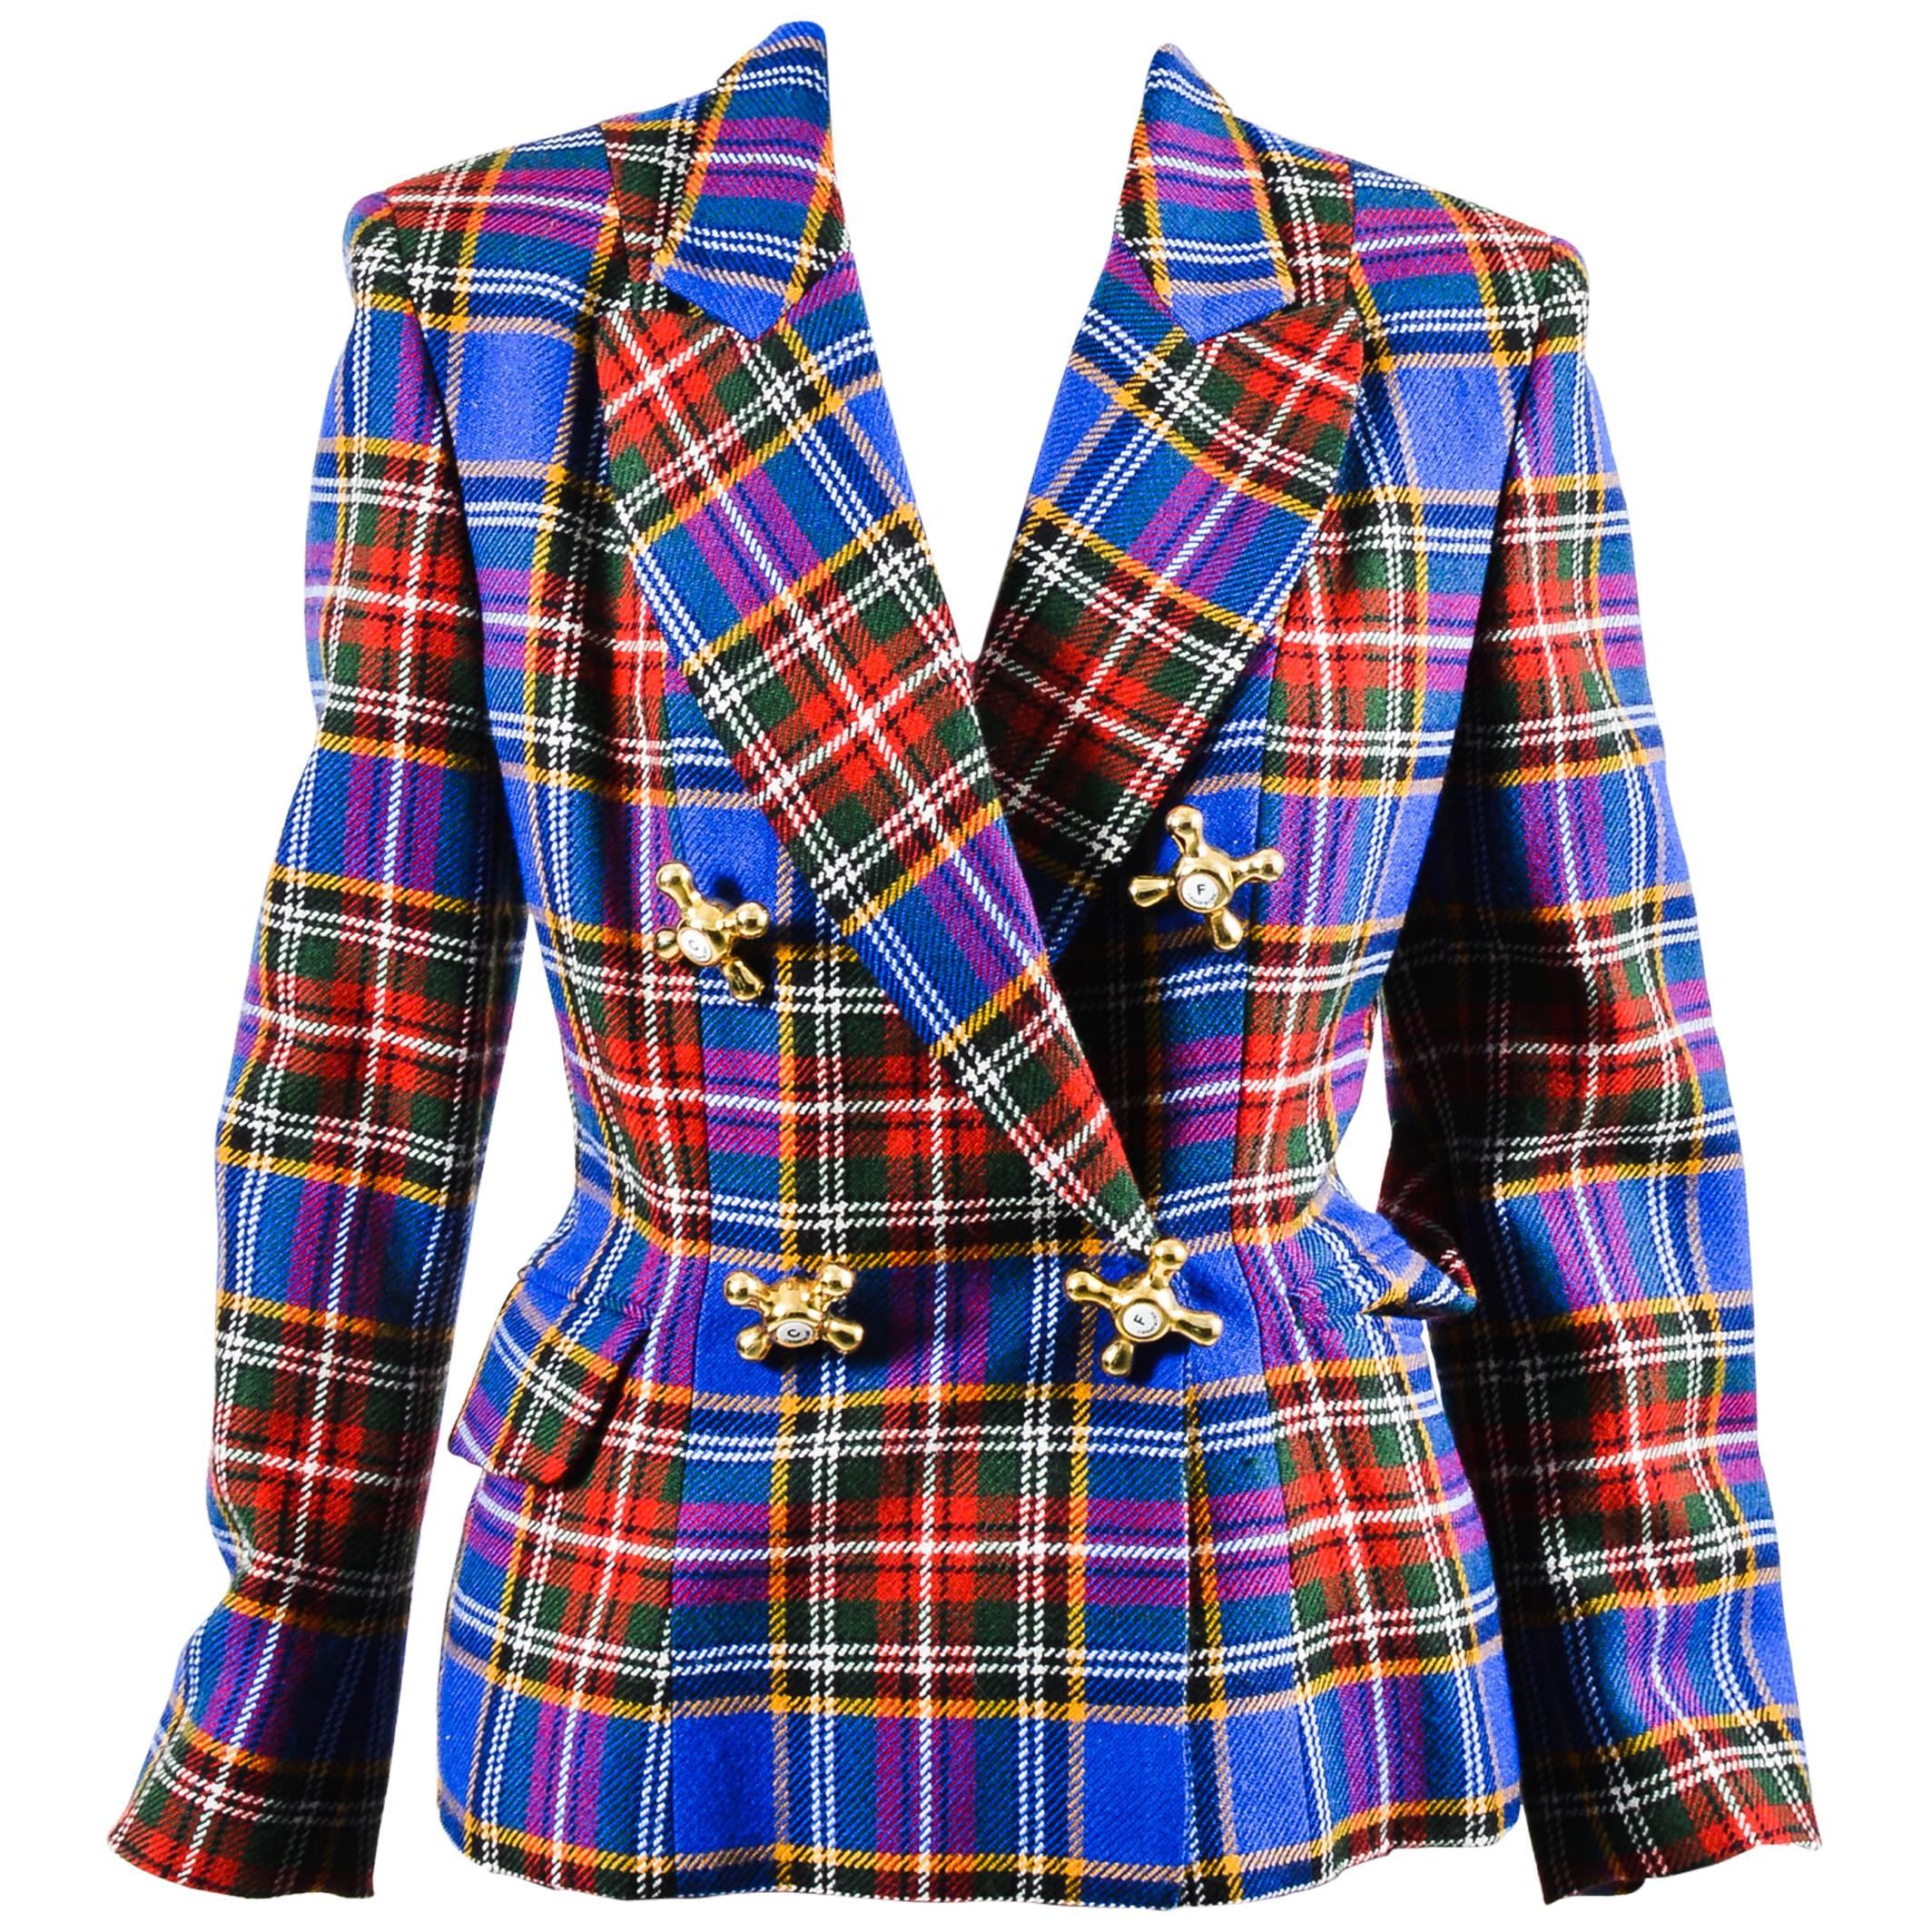 Vintage Moschino Cheap and Chic Blue Wool Plaid Knob Blazer Jacket Size 6 For Sale